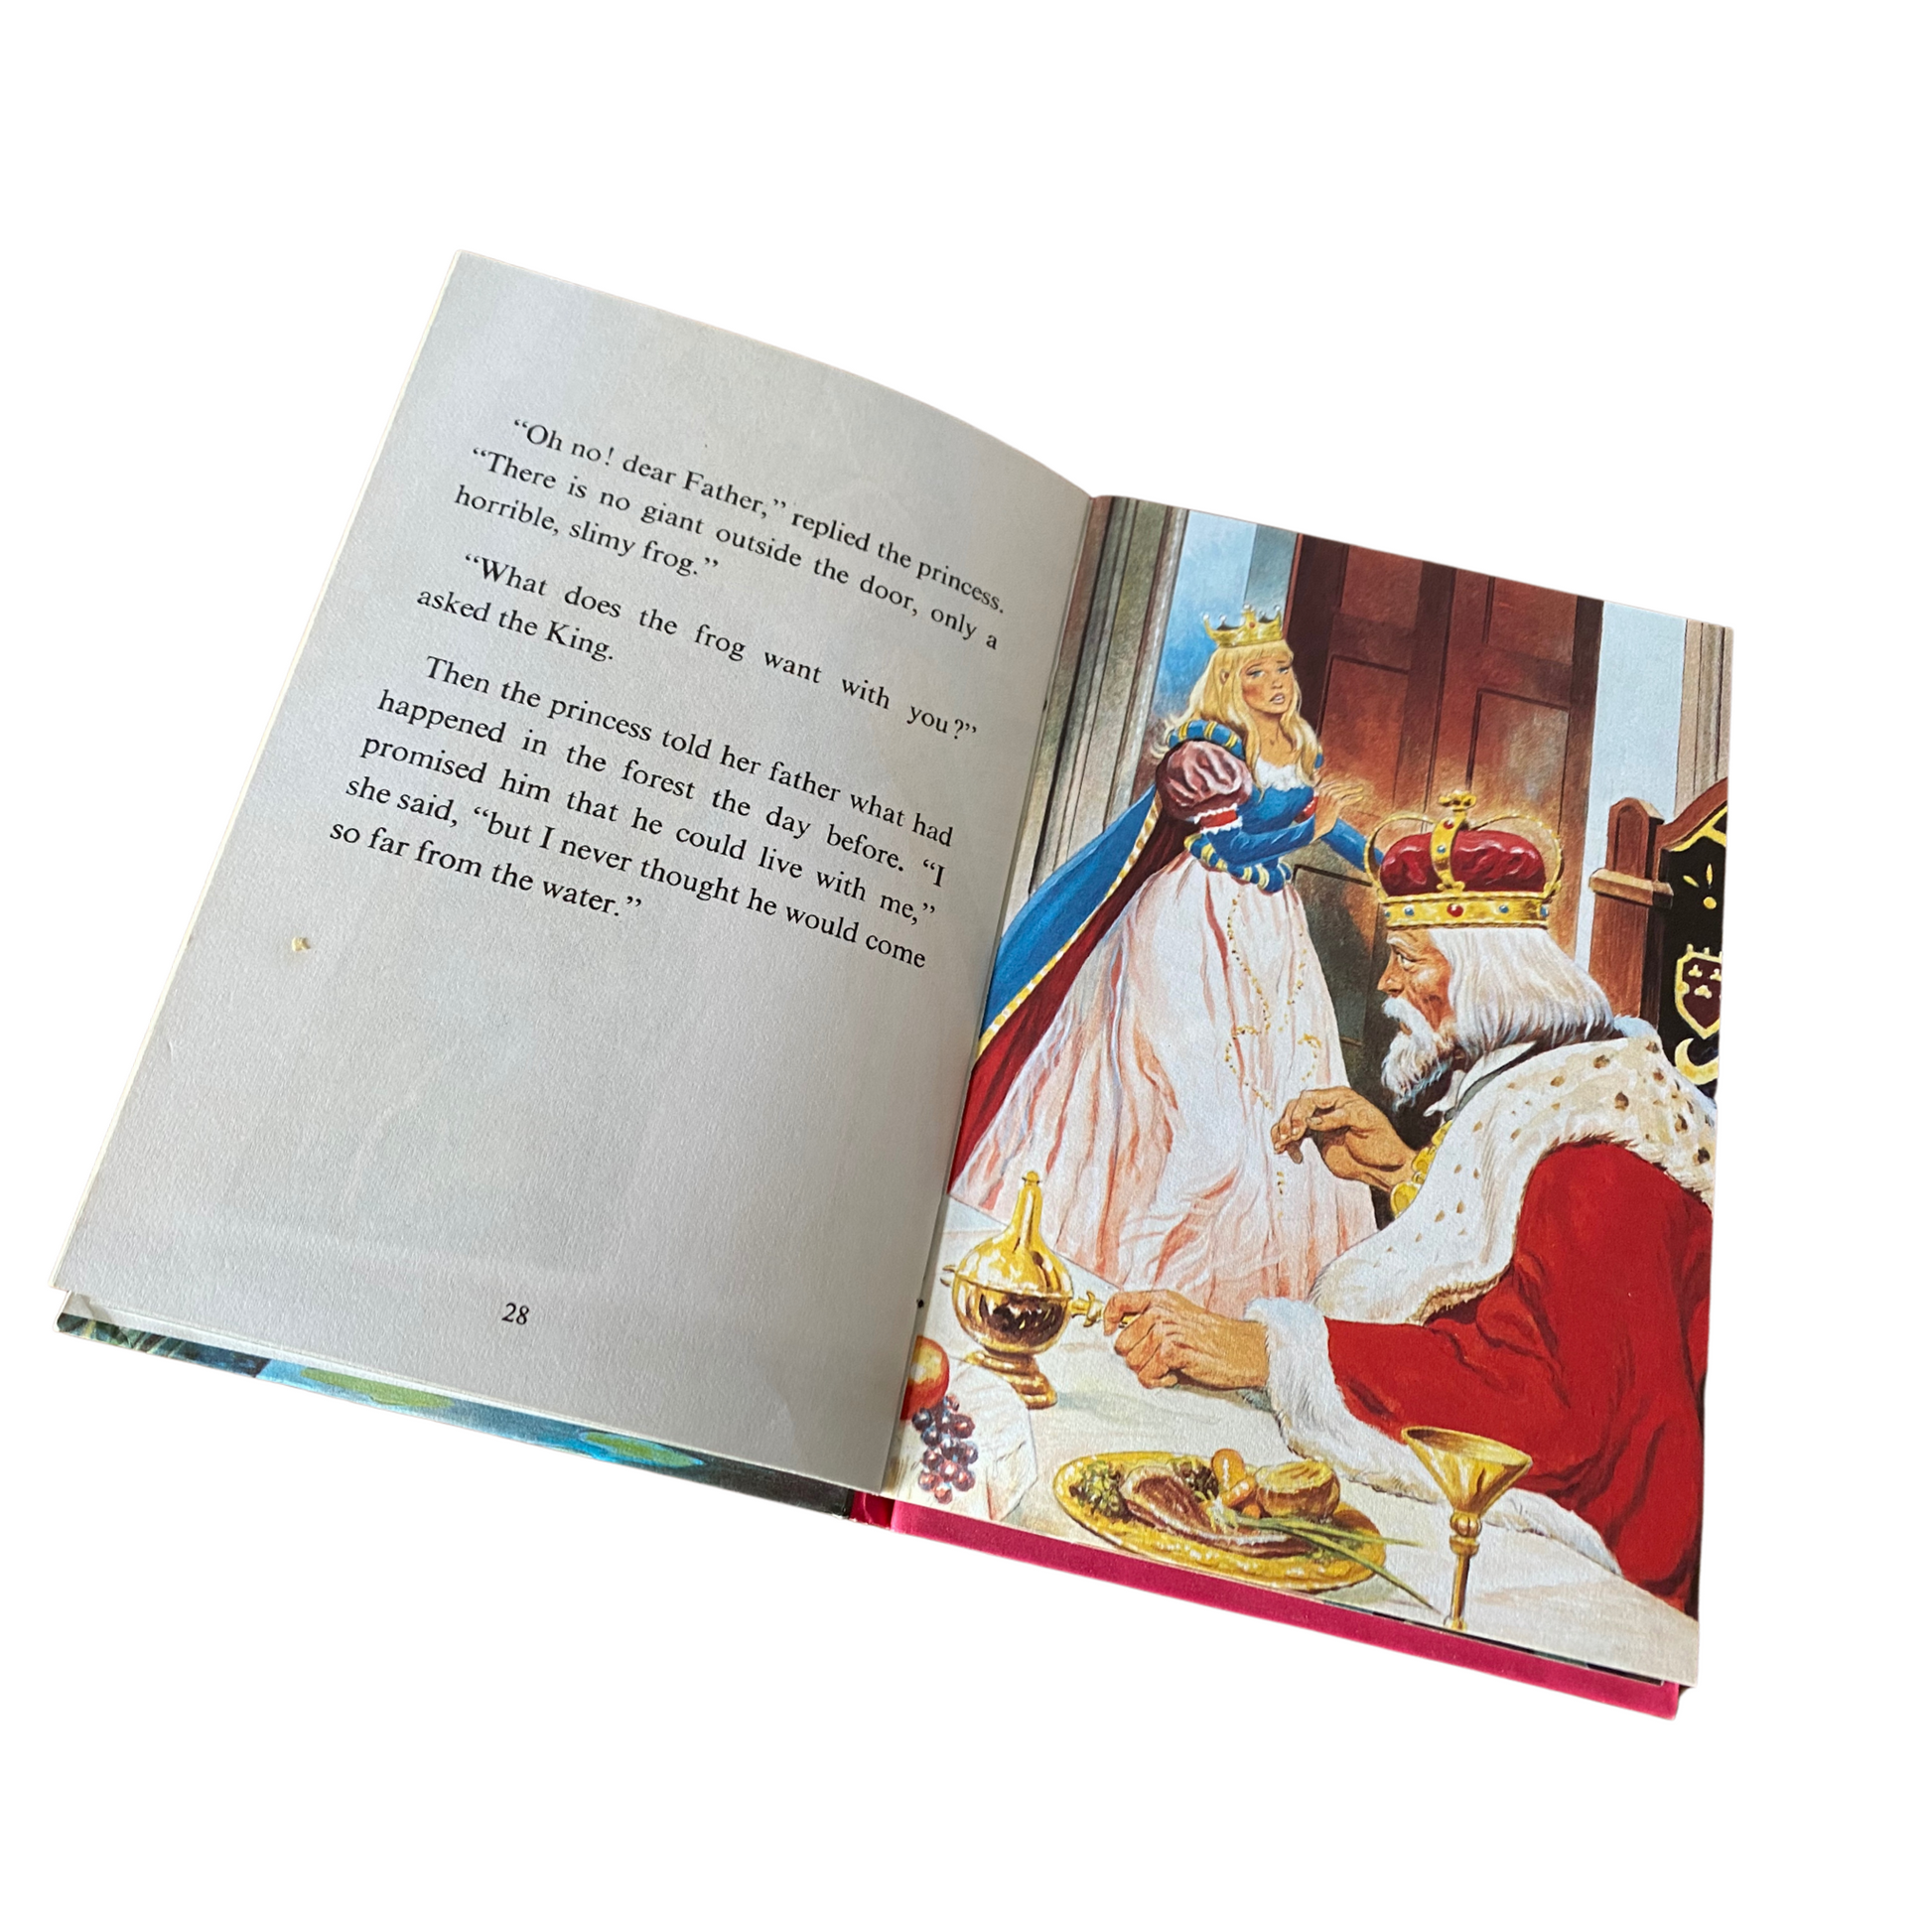 70s Ladybird book - The Princess and the Frog printed in England